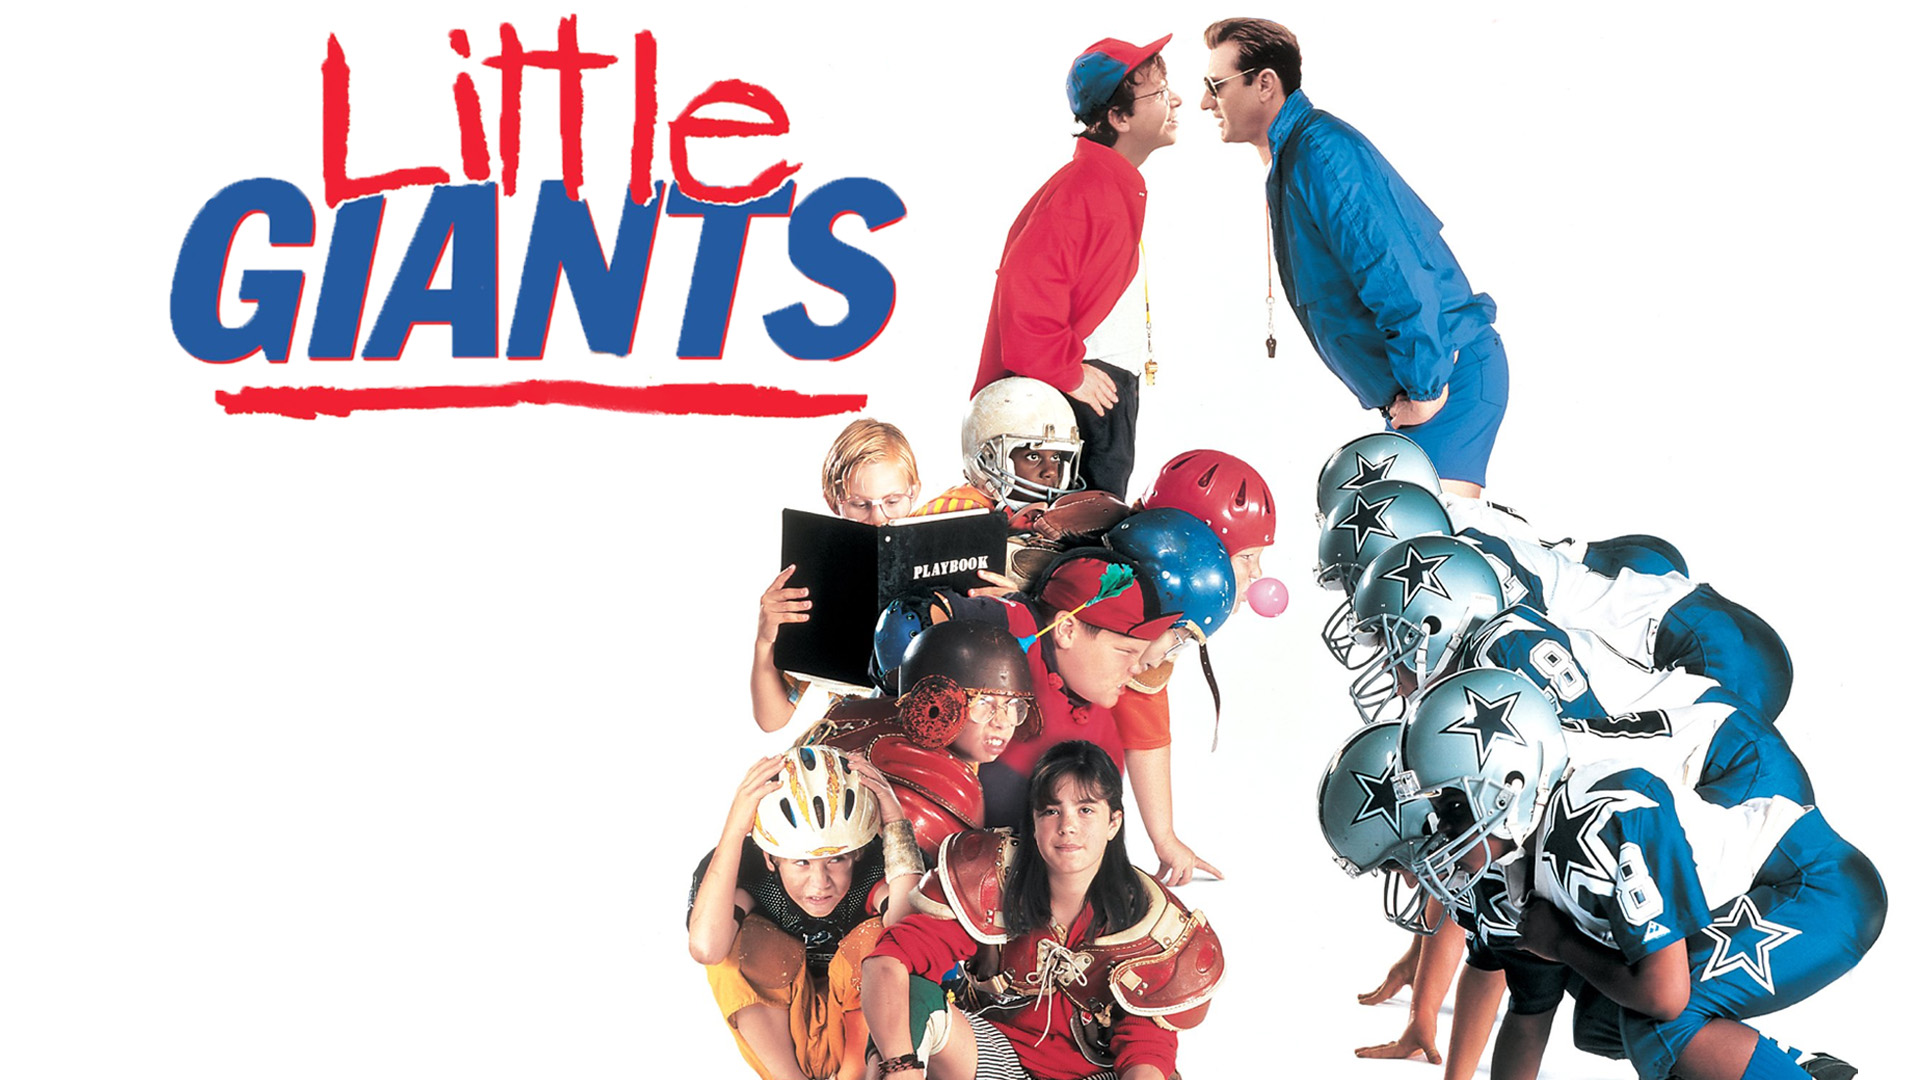 How To Watch The Little Giants